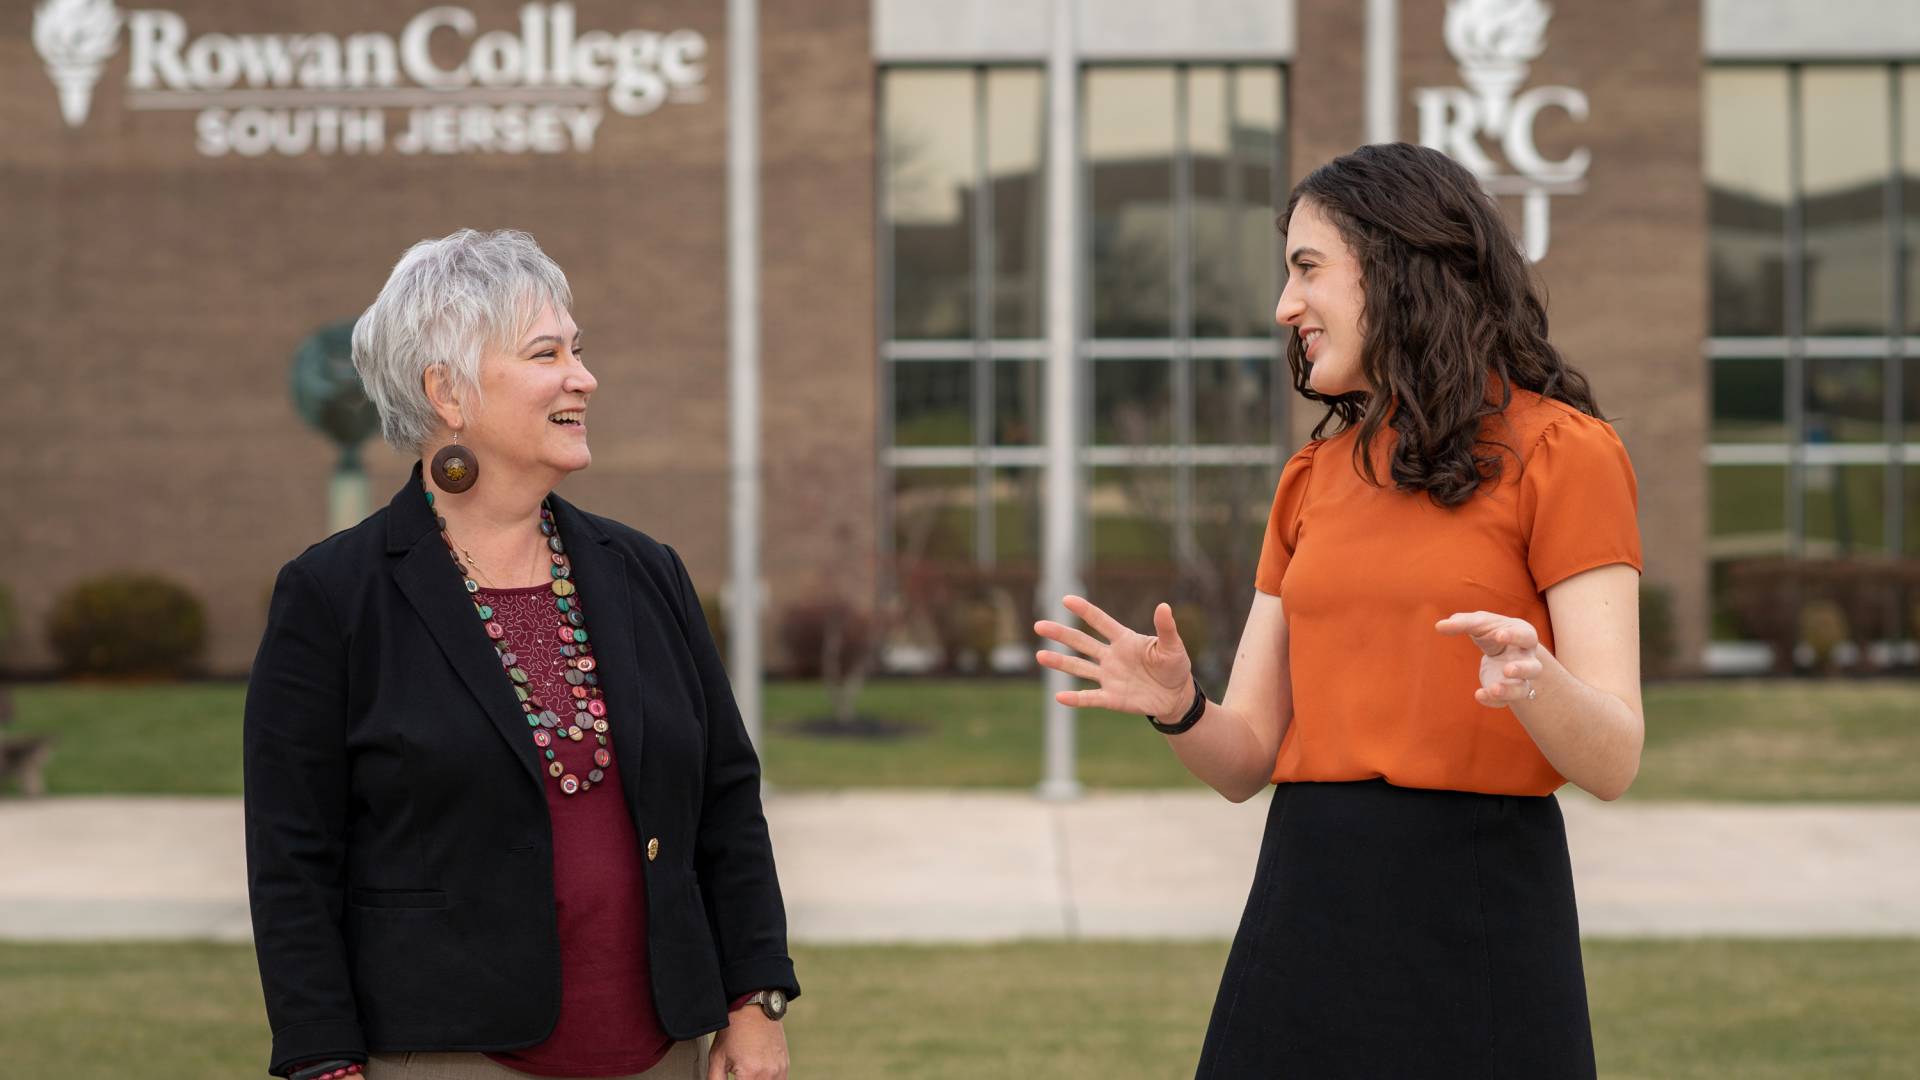 two women speaking to each other on Rowen College campus